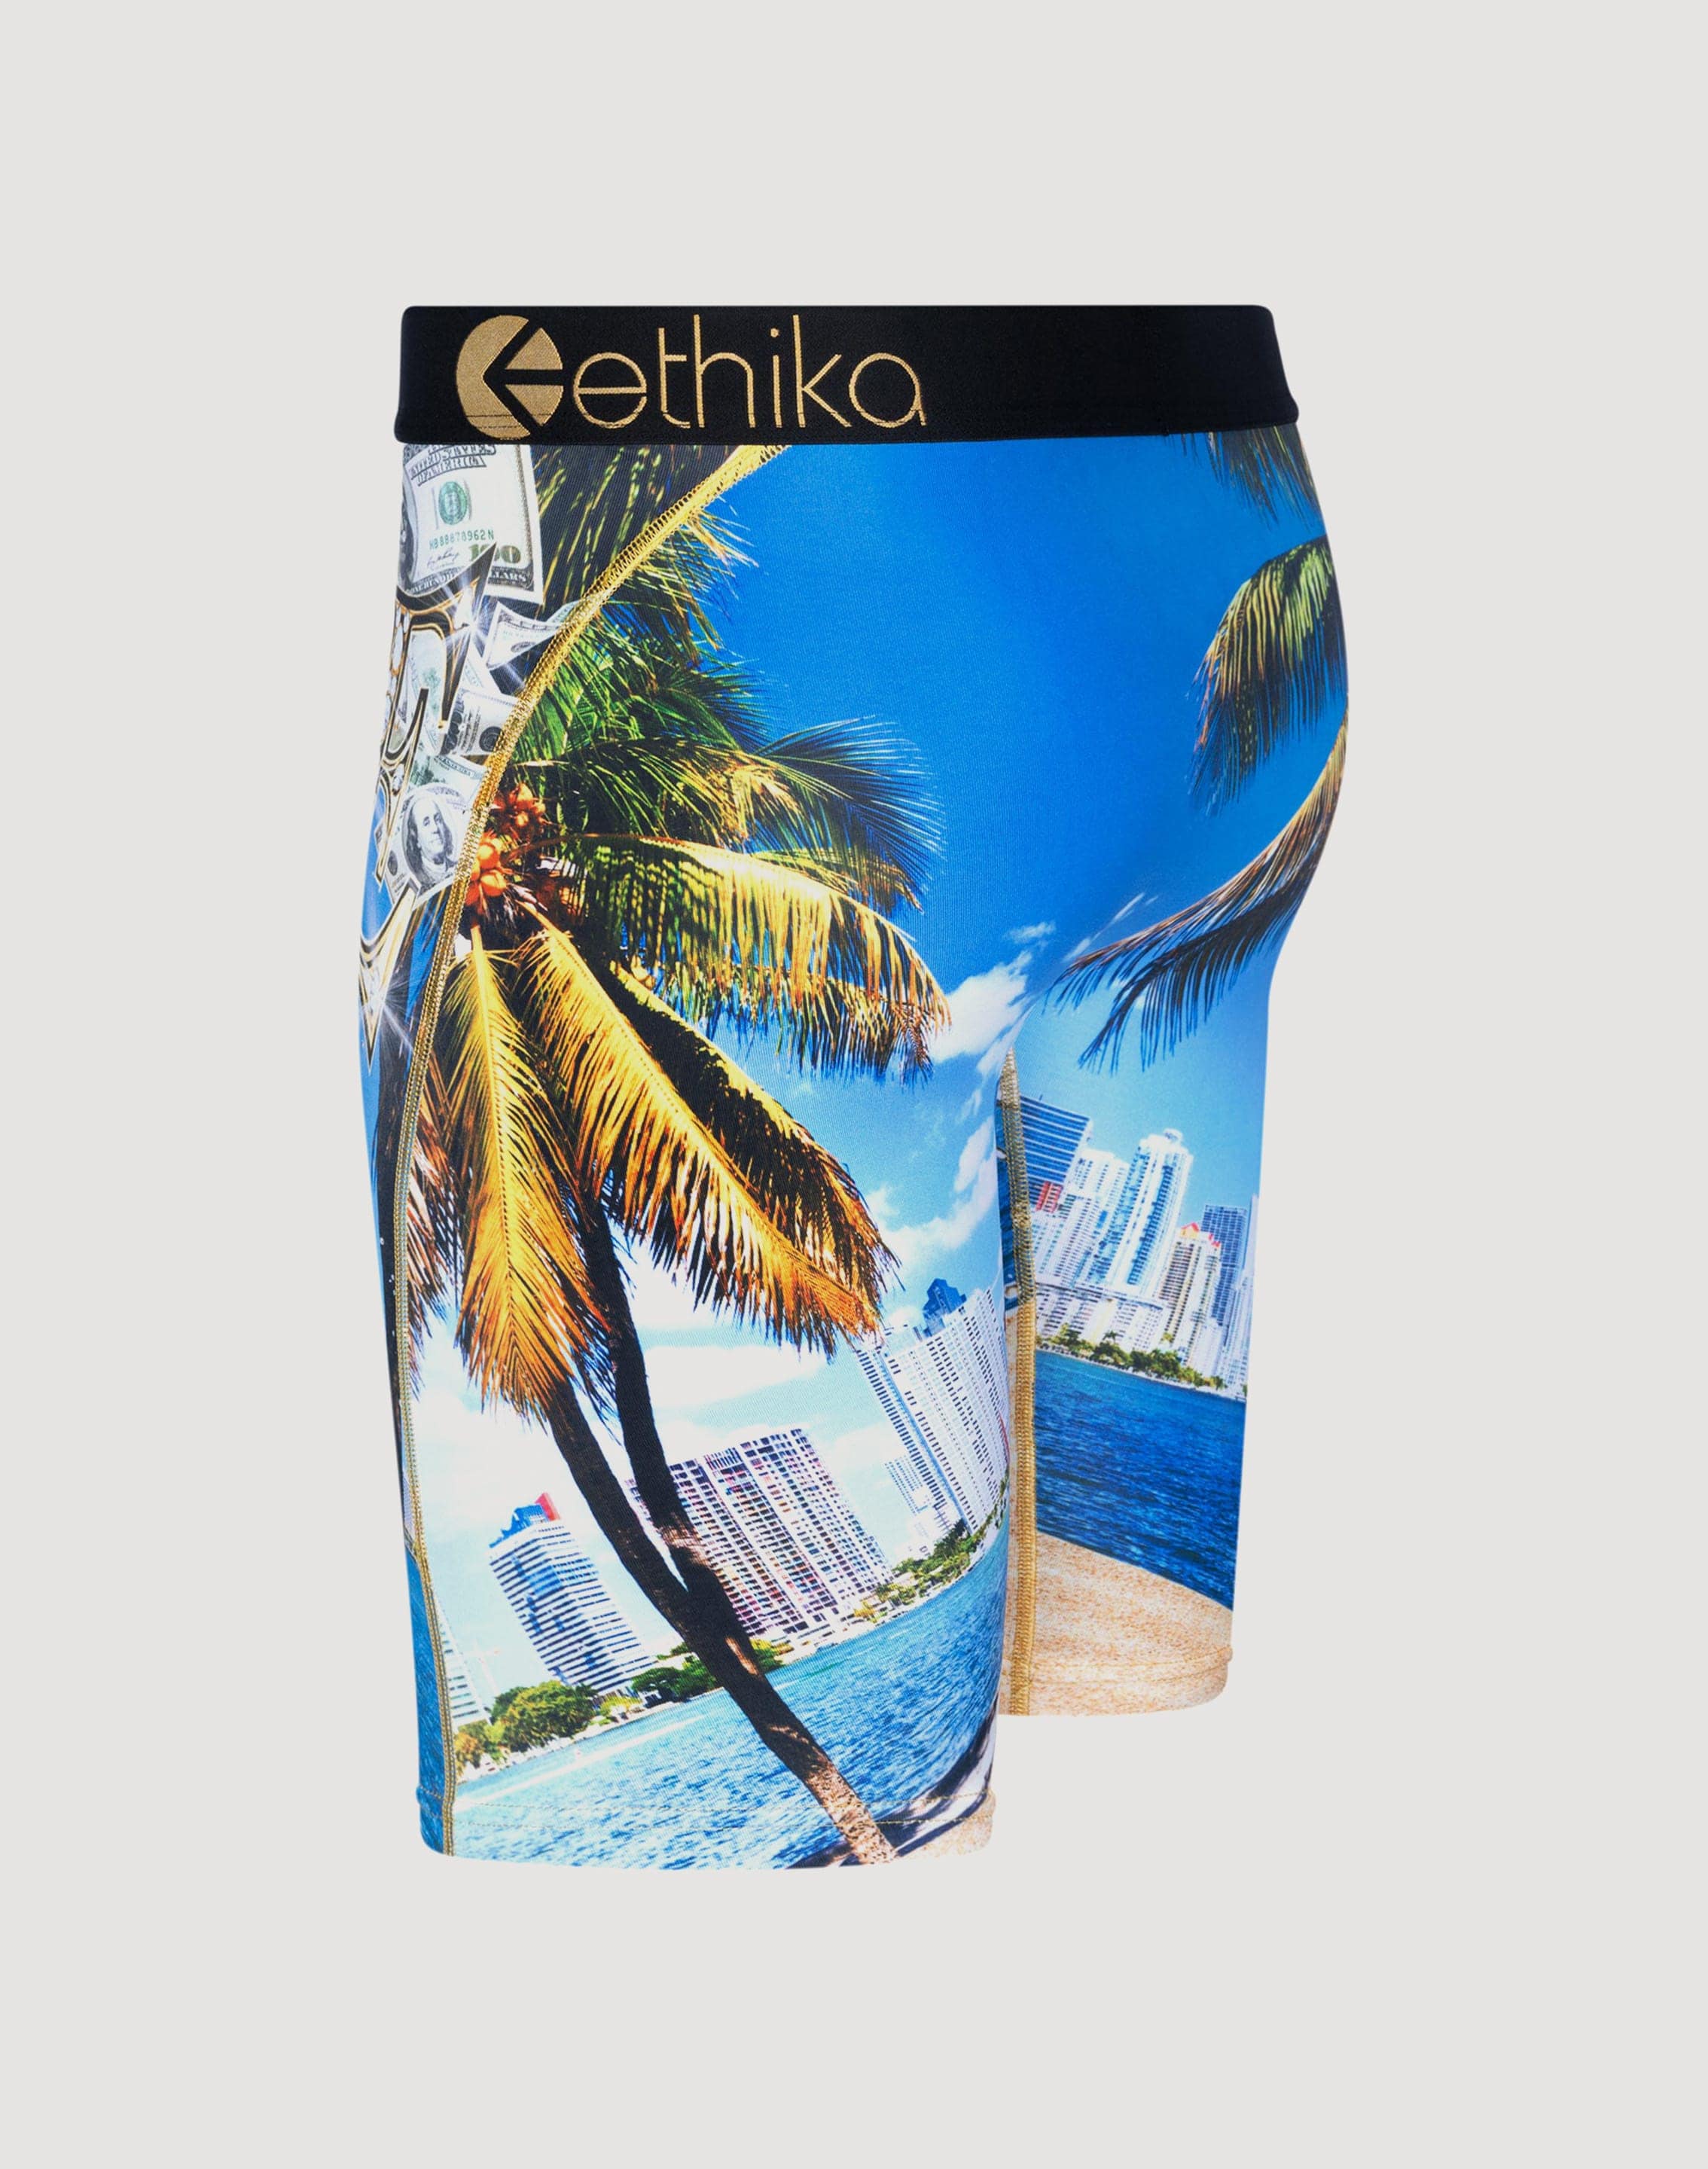 Ethika Champagne Showers Boxer Briefs – DTLR